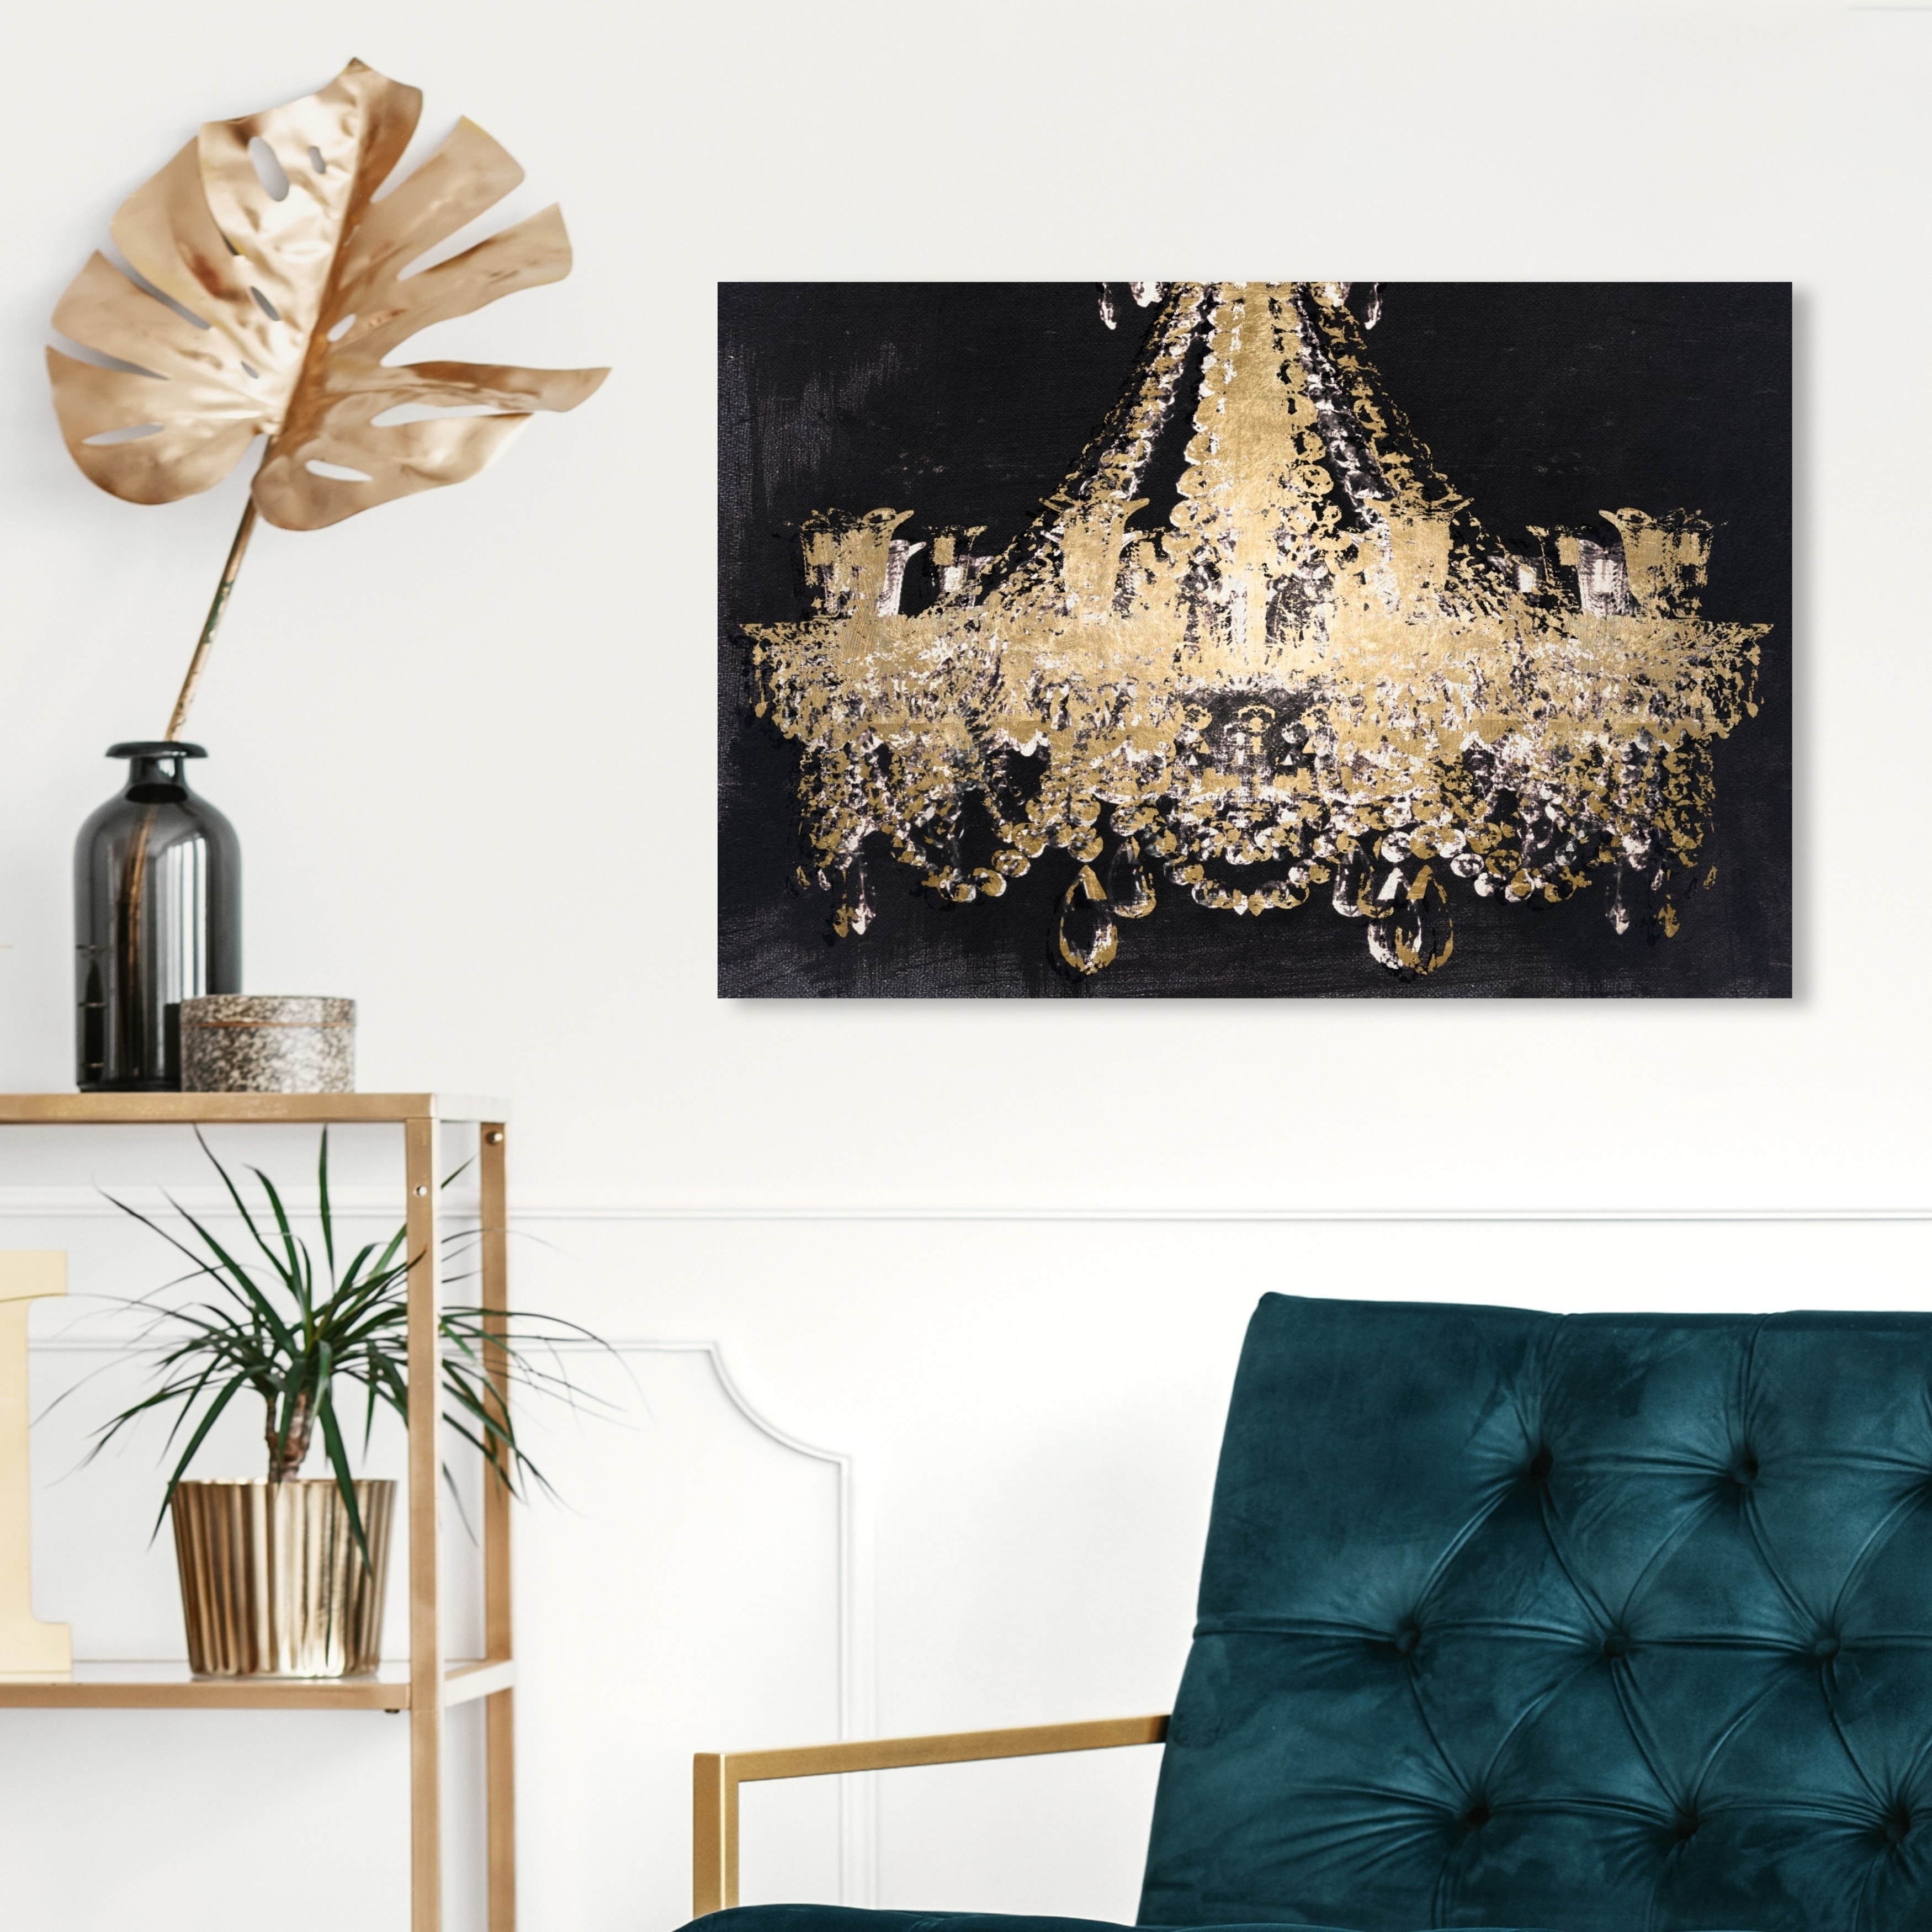 Oliver Gal 'Chandelier Gold' Fashion and Glam Wall Art Canvas